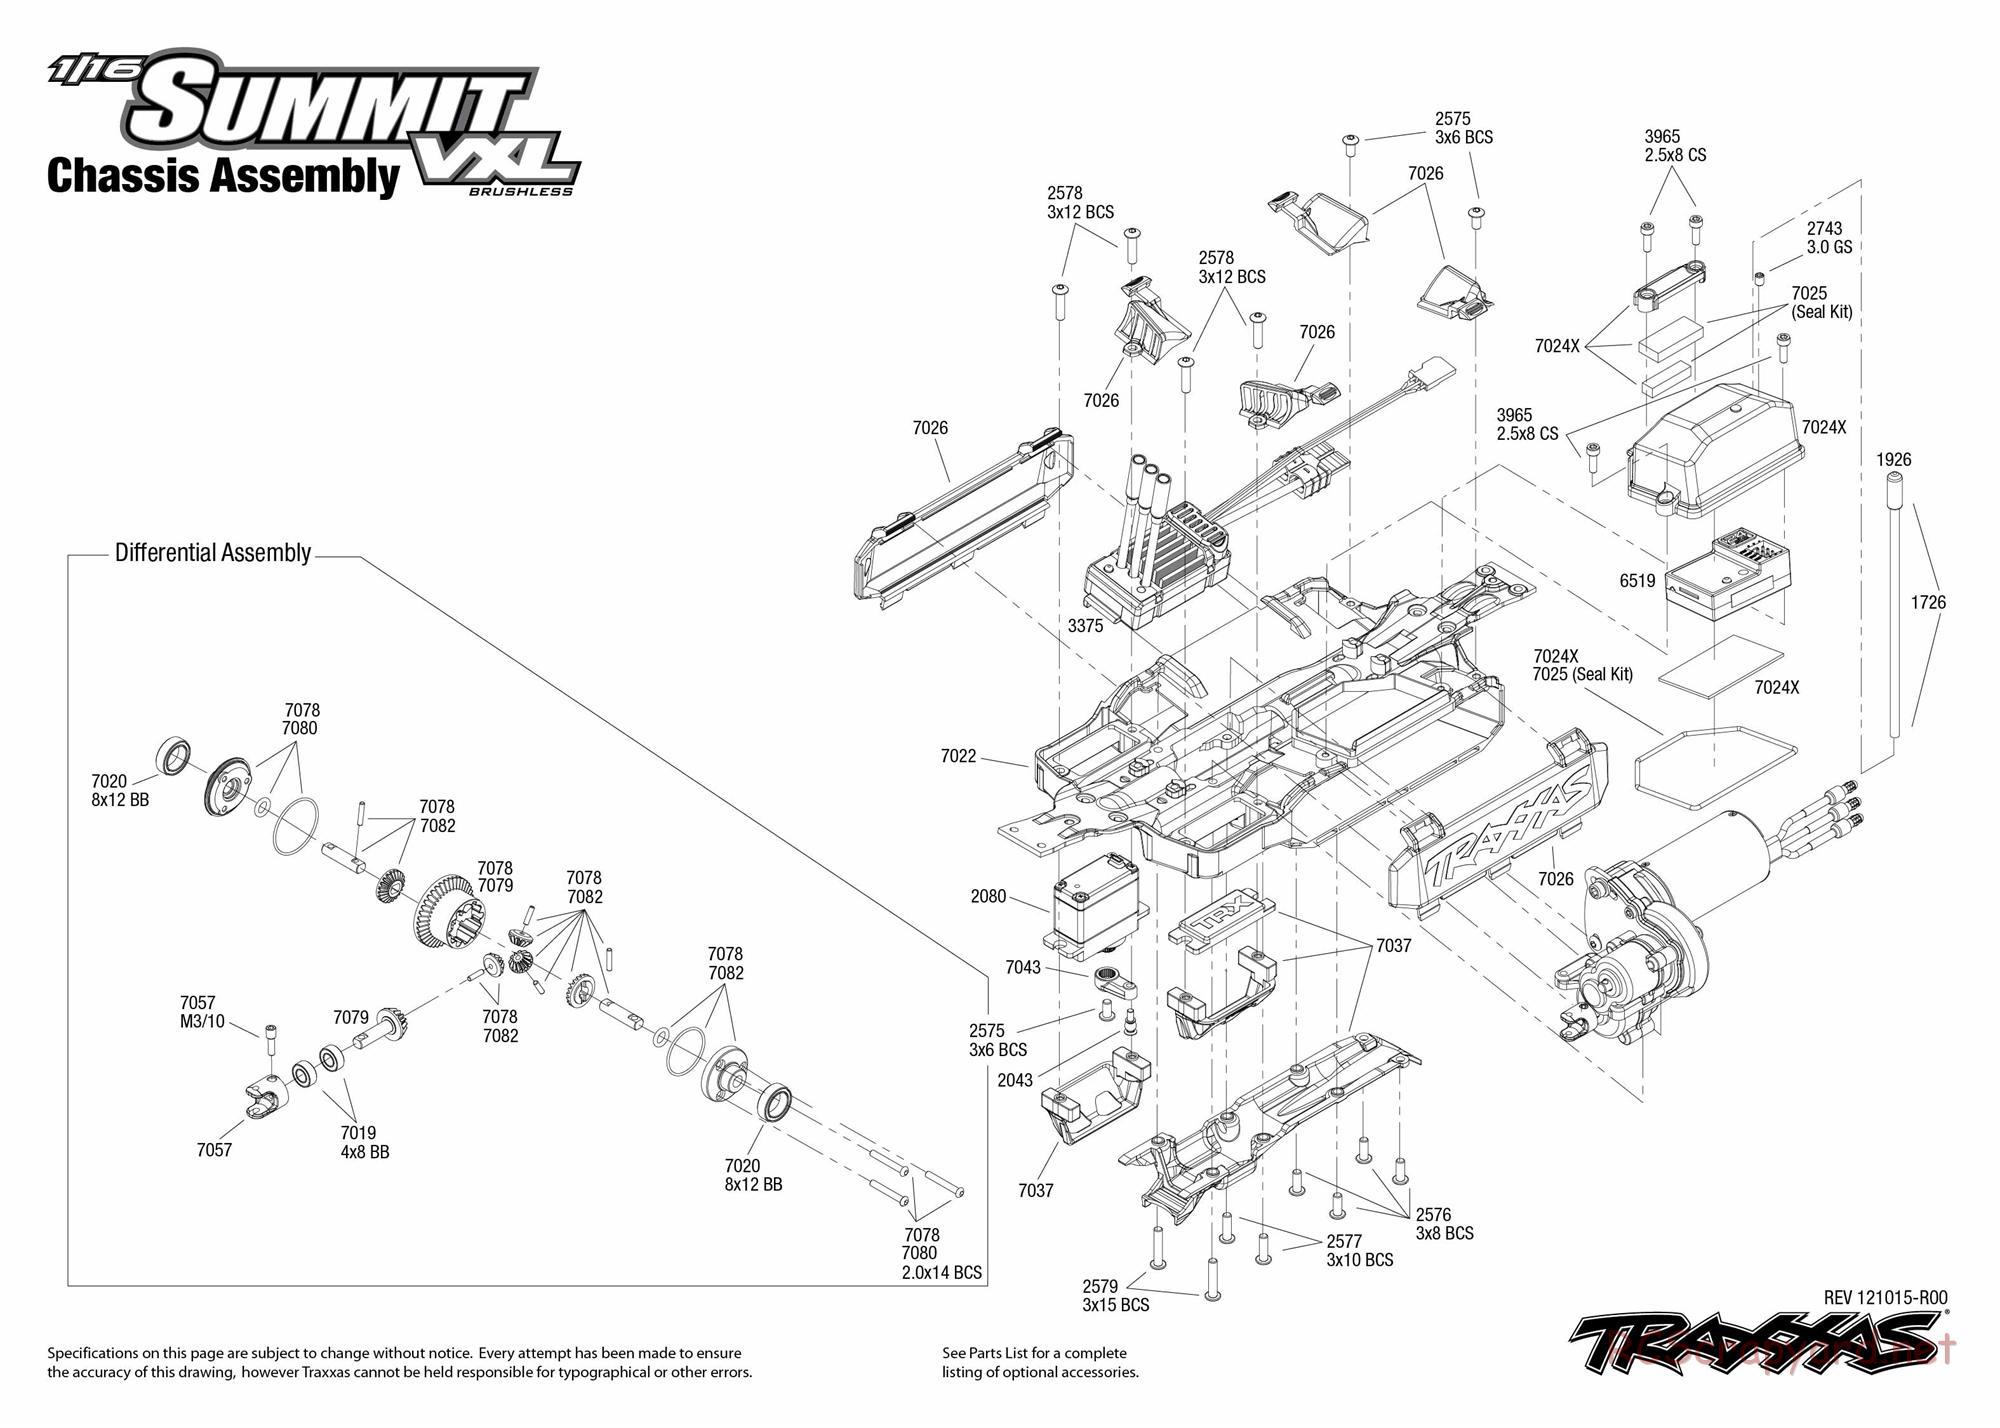 Traxxas - 1/16 Summit VXL (2012) - Exploded Views - Page 1